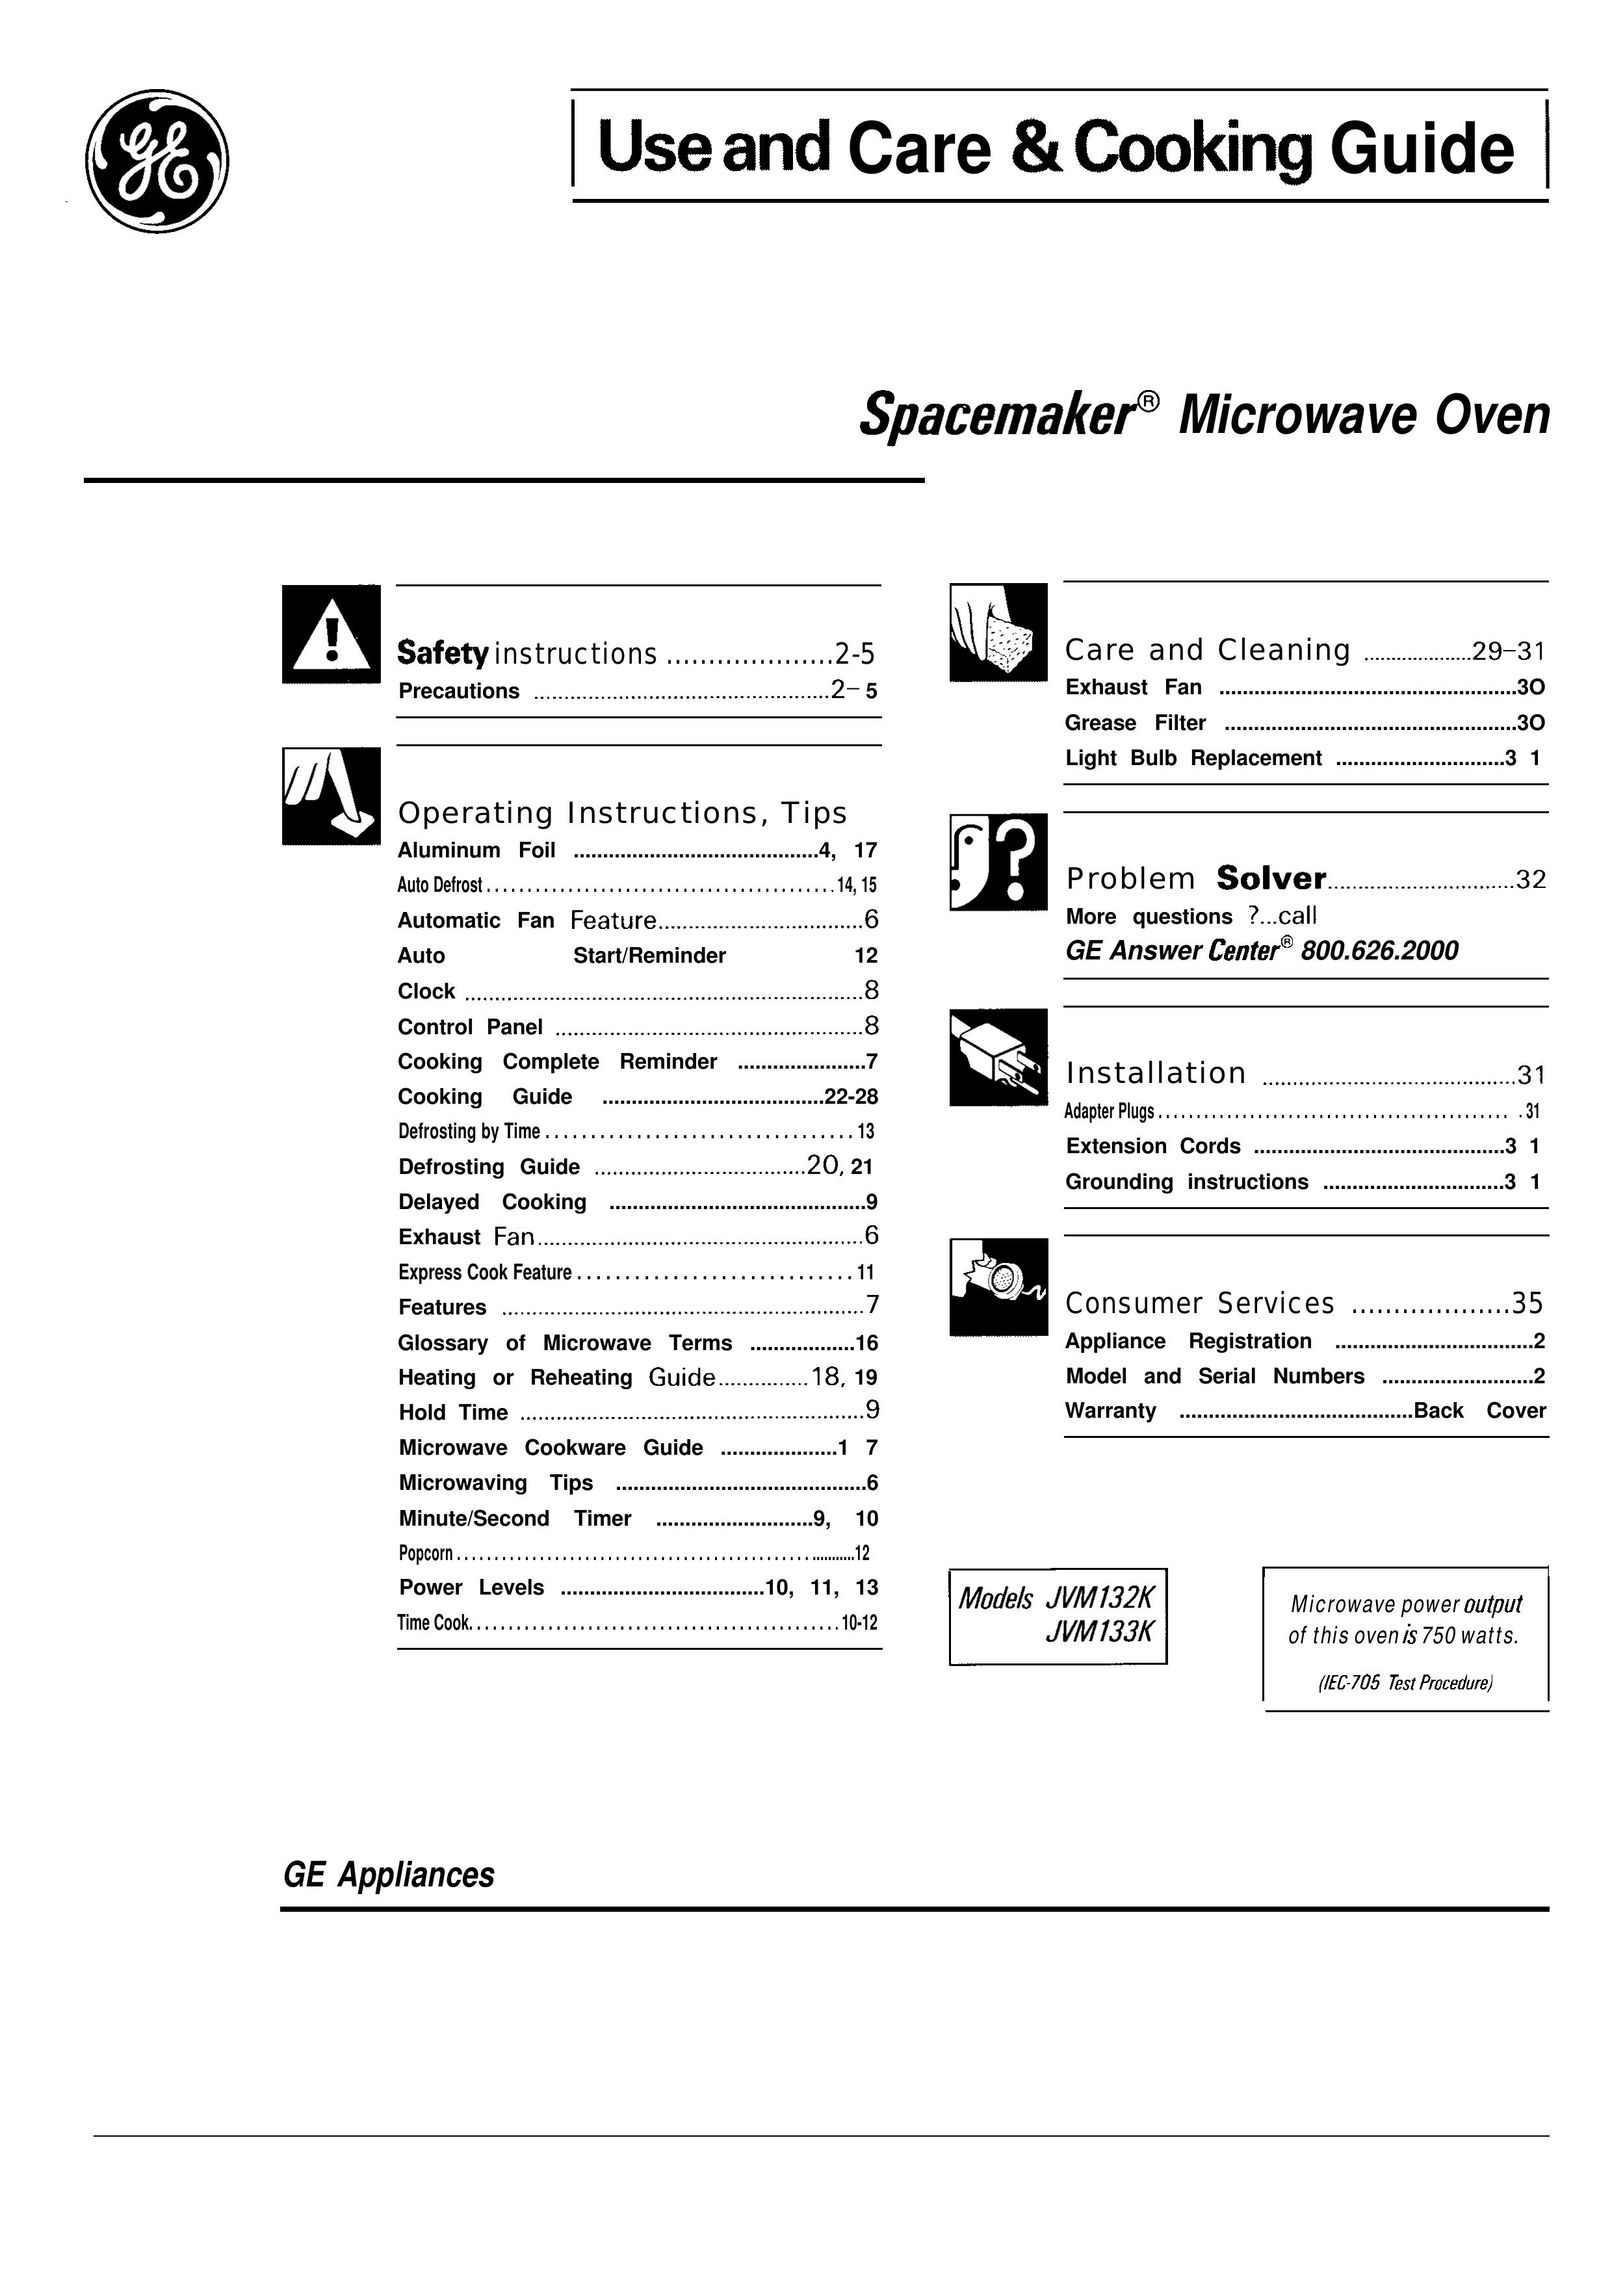 GE 164 D2588P088 Microwave Oven User Manual